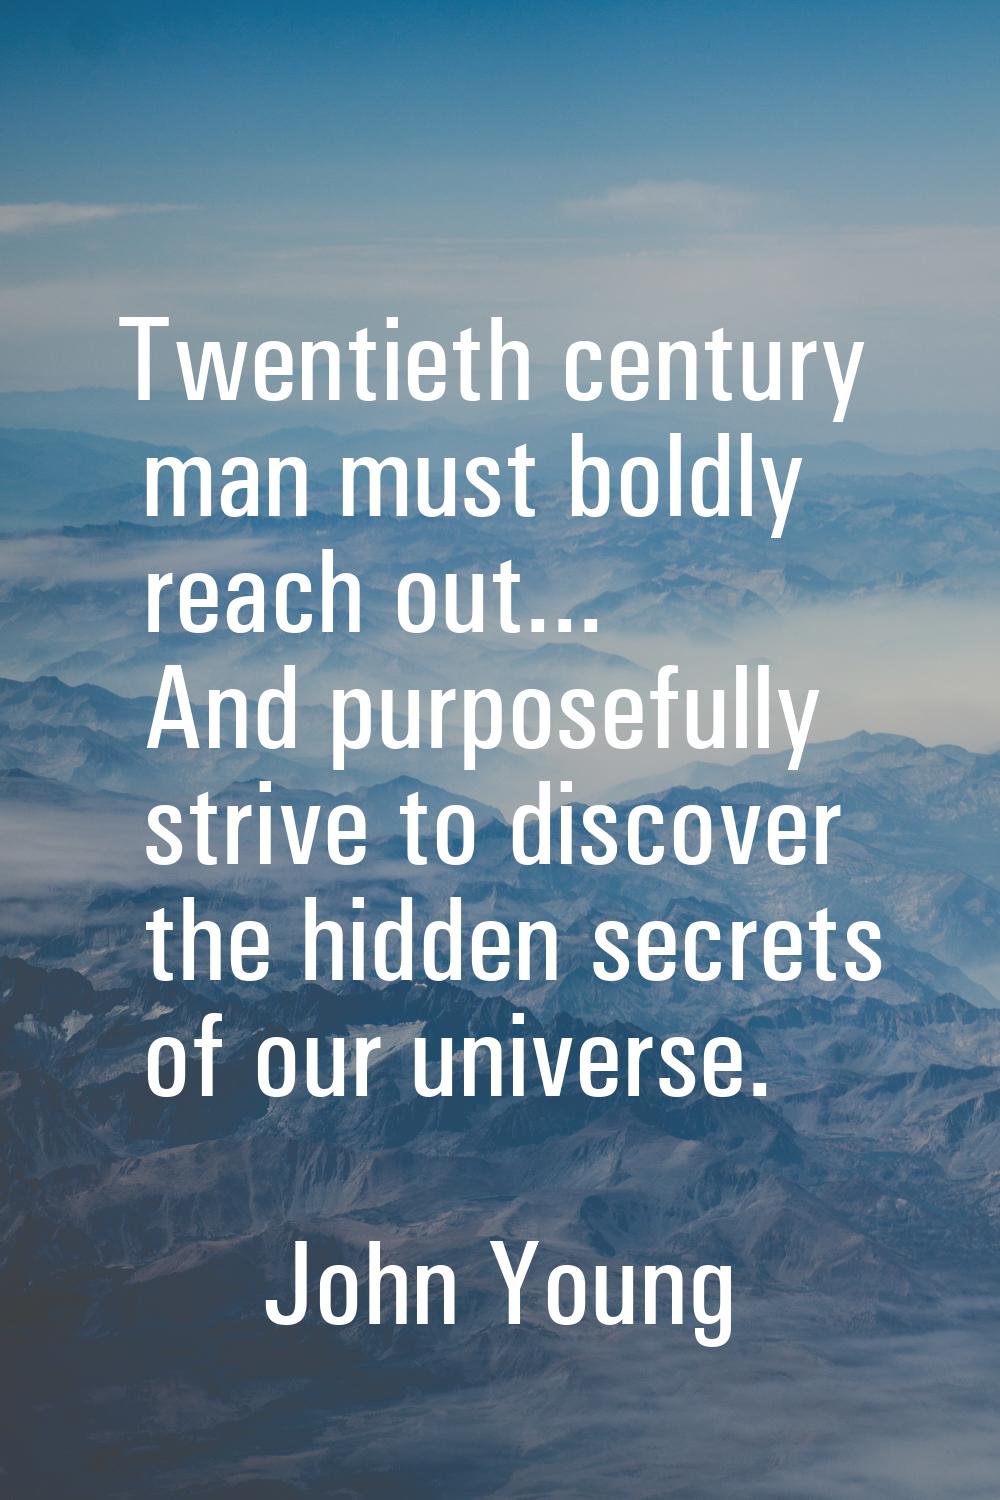 Twentieth century man must boldly reach out... And purposefully strive to discover the hidden secre